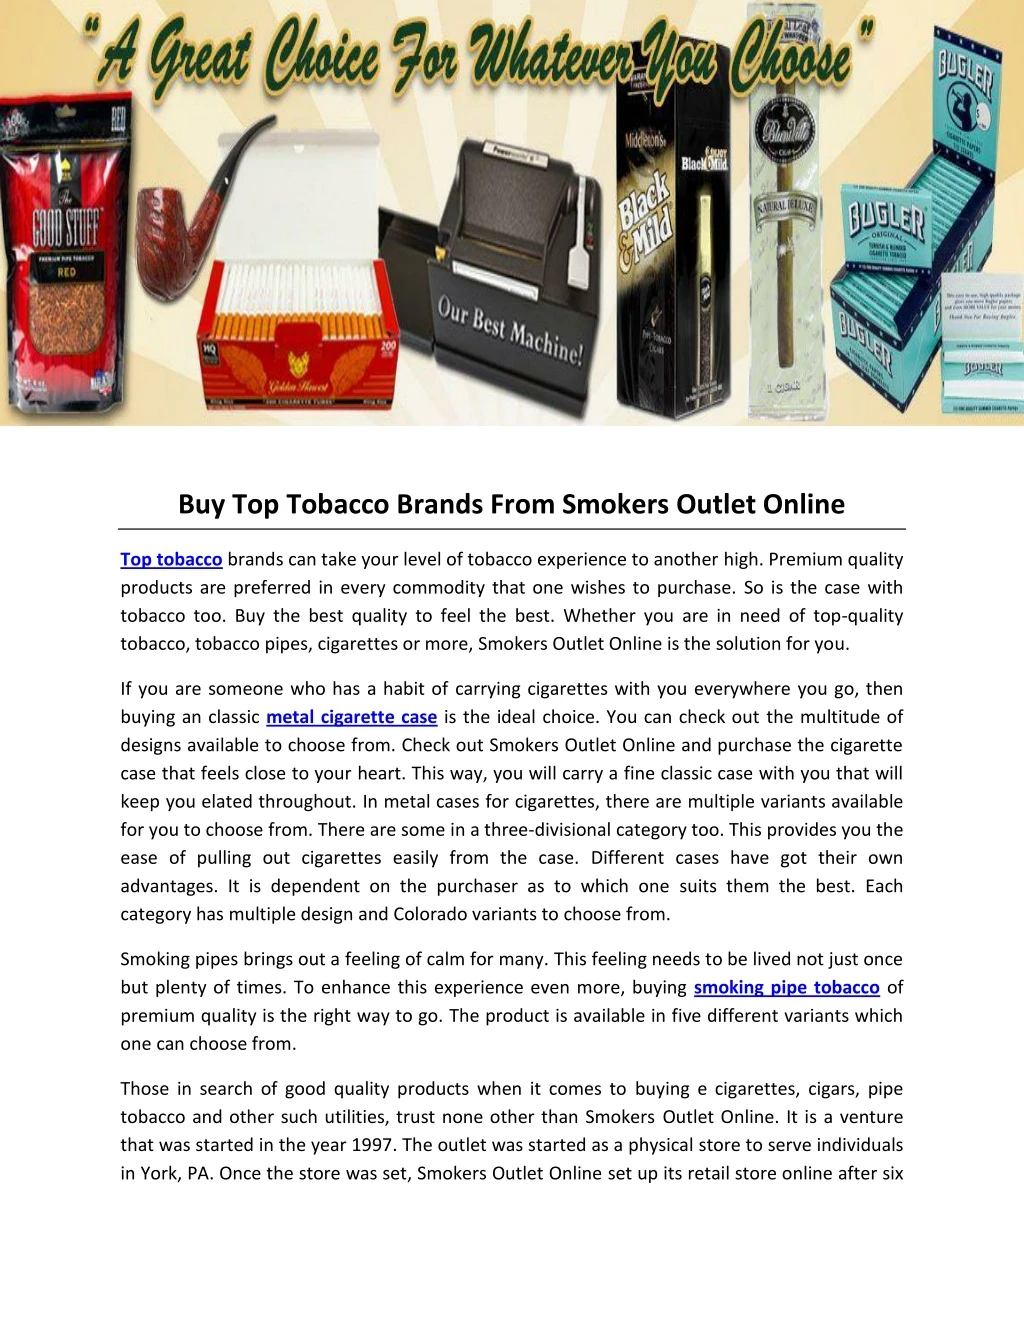 buy top tobacco brands from smokers outlet online